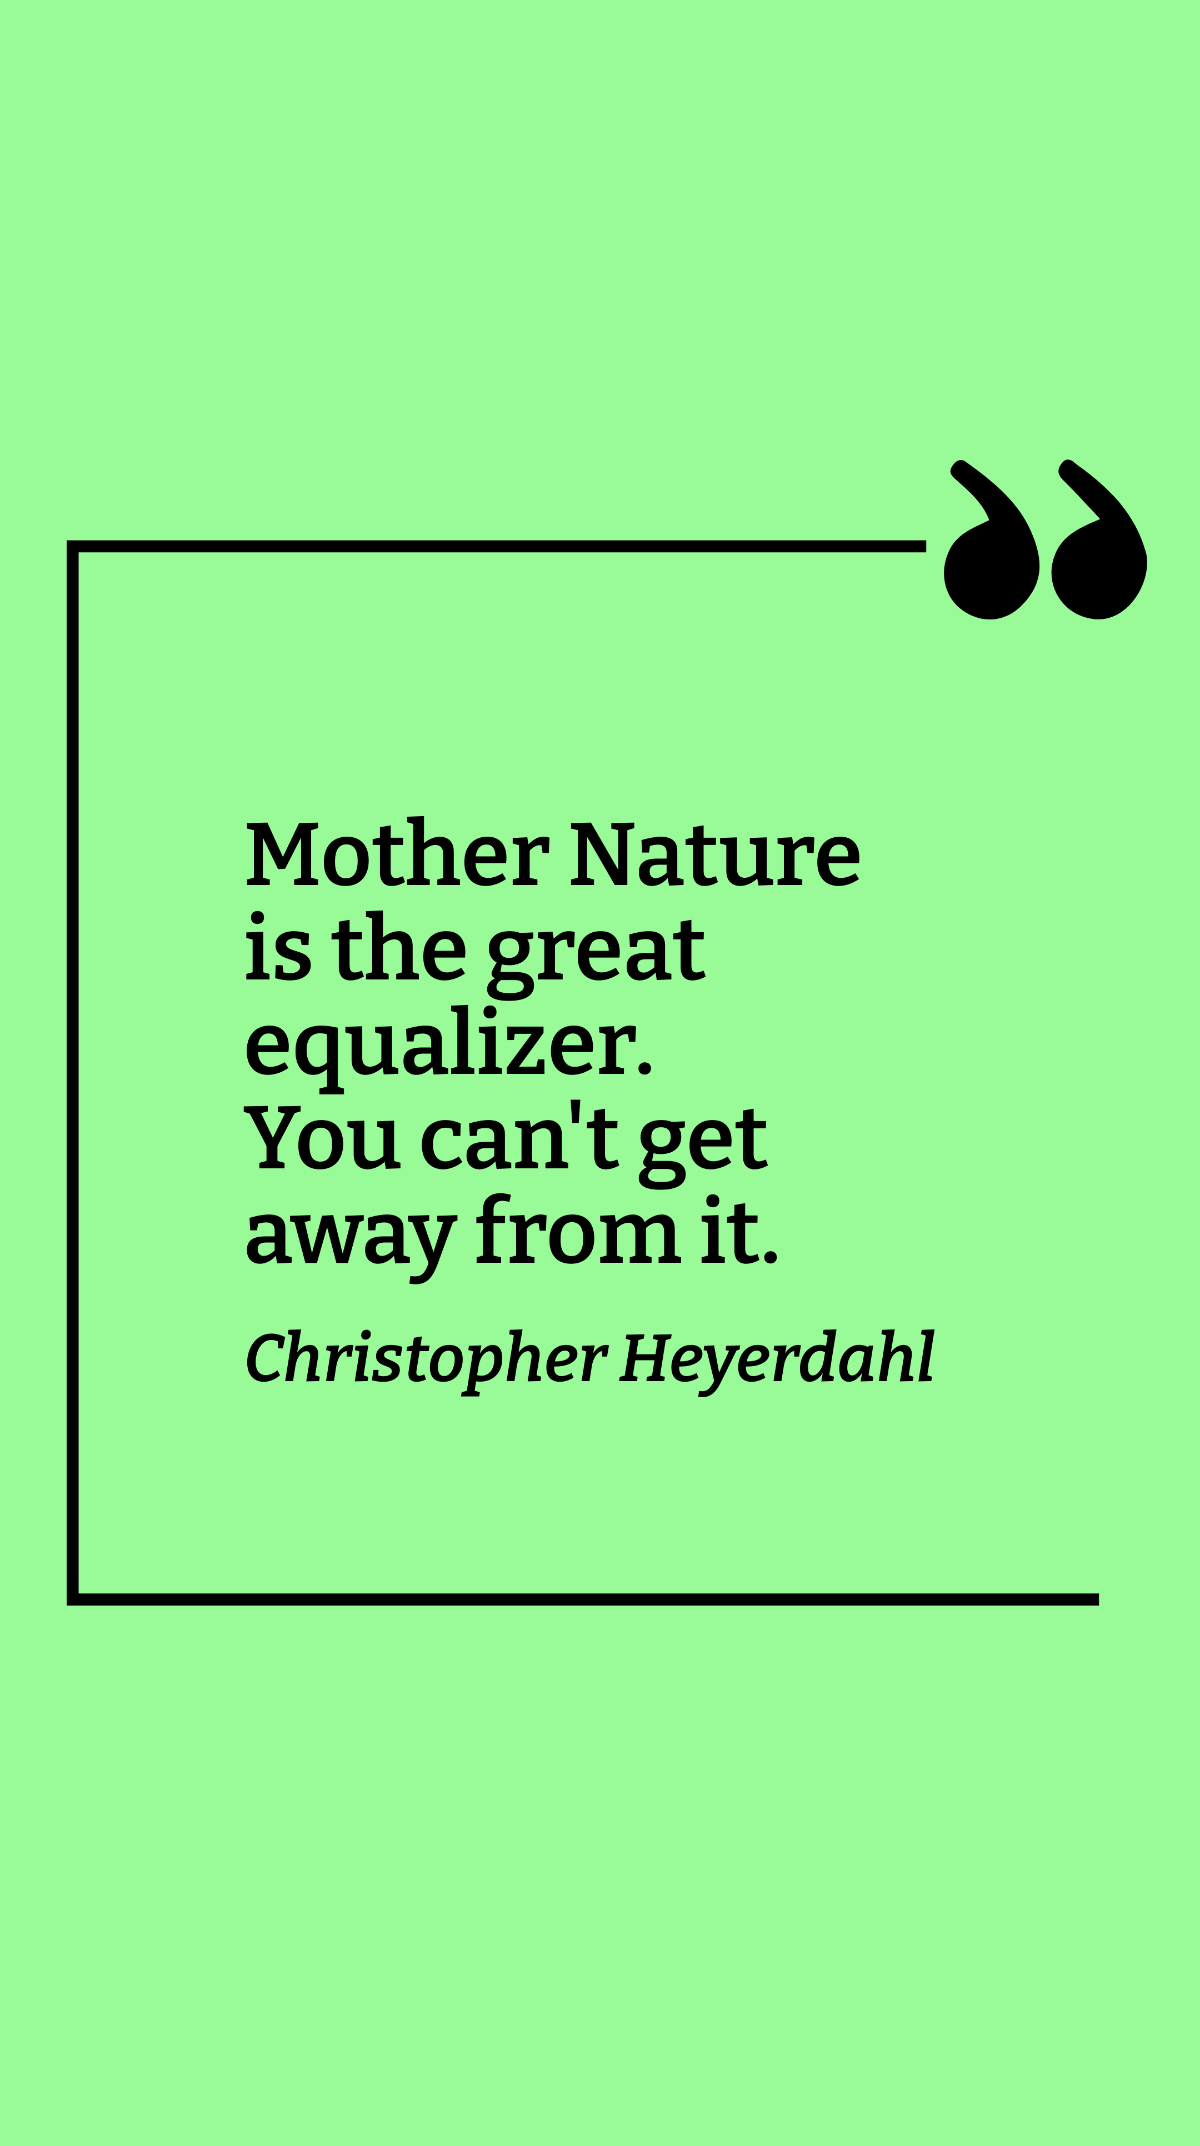 Christopher Heyerdahl - Mother Nature is the great equalizer. You can't get away from it. Template